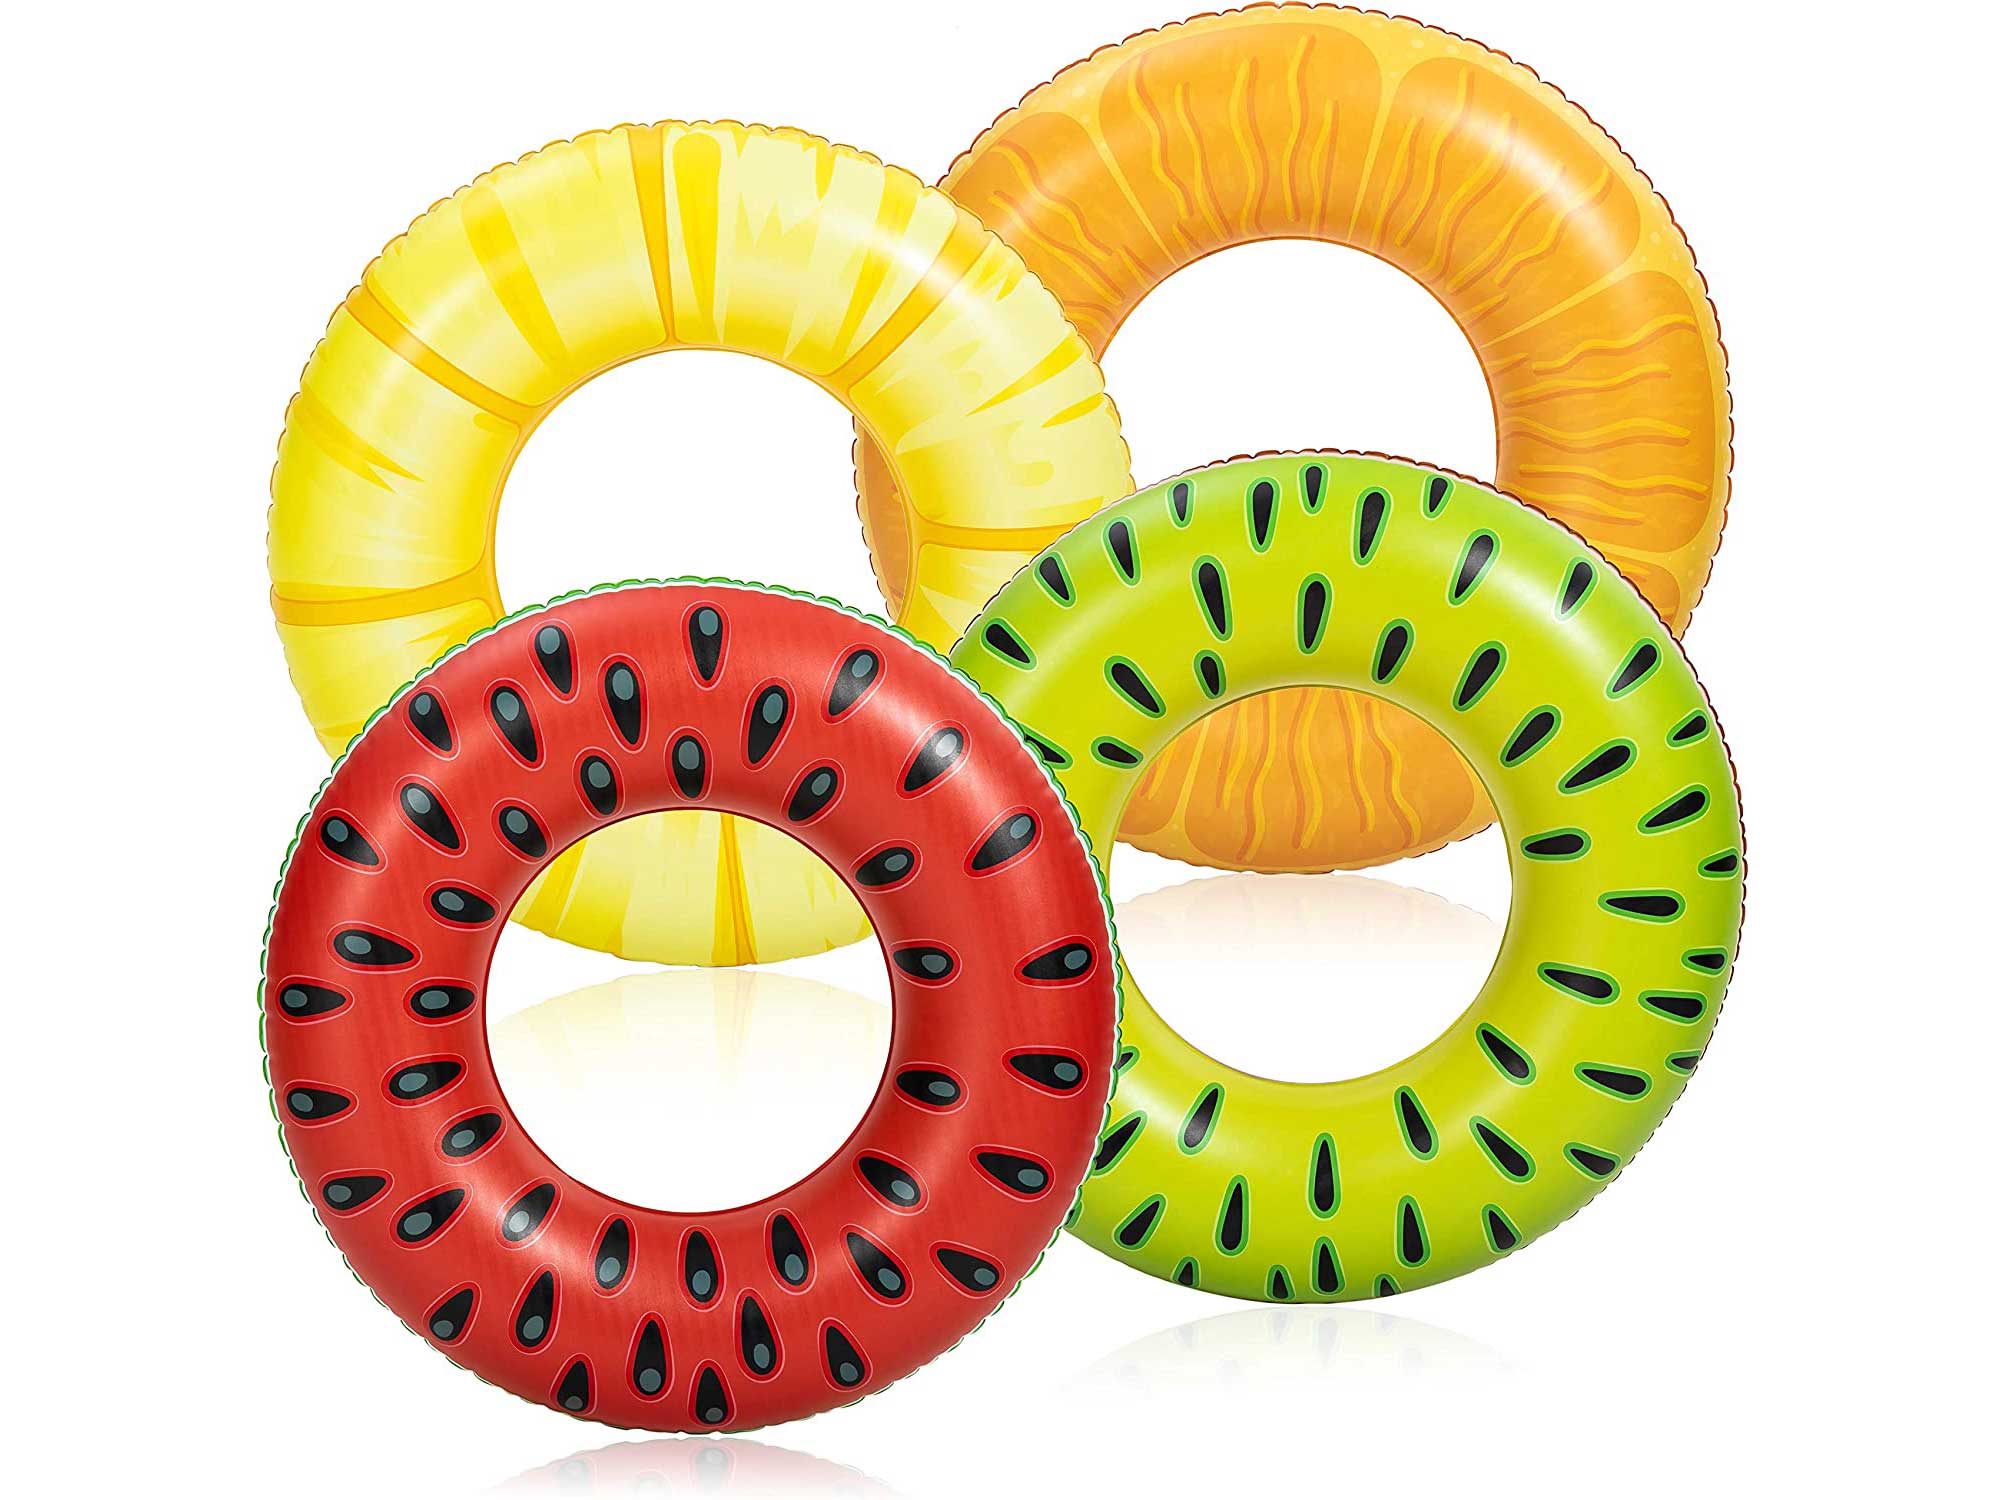 Inflatable Pool Floats Fruit Tube Rings (4 Pack), Fruit Pool Tubes, Pool Floaties Toys, Beach Swimming Party Toys for Kids and Adults